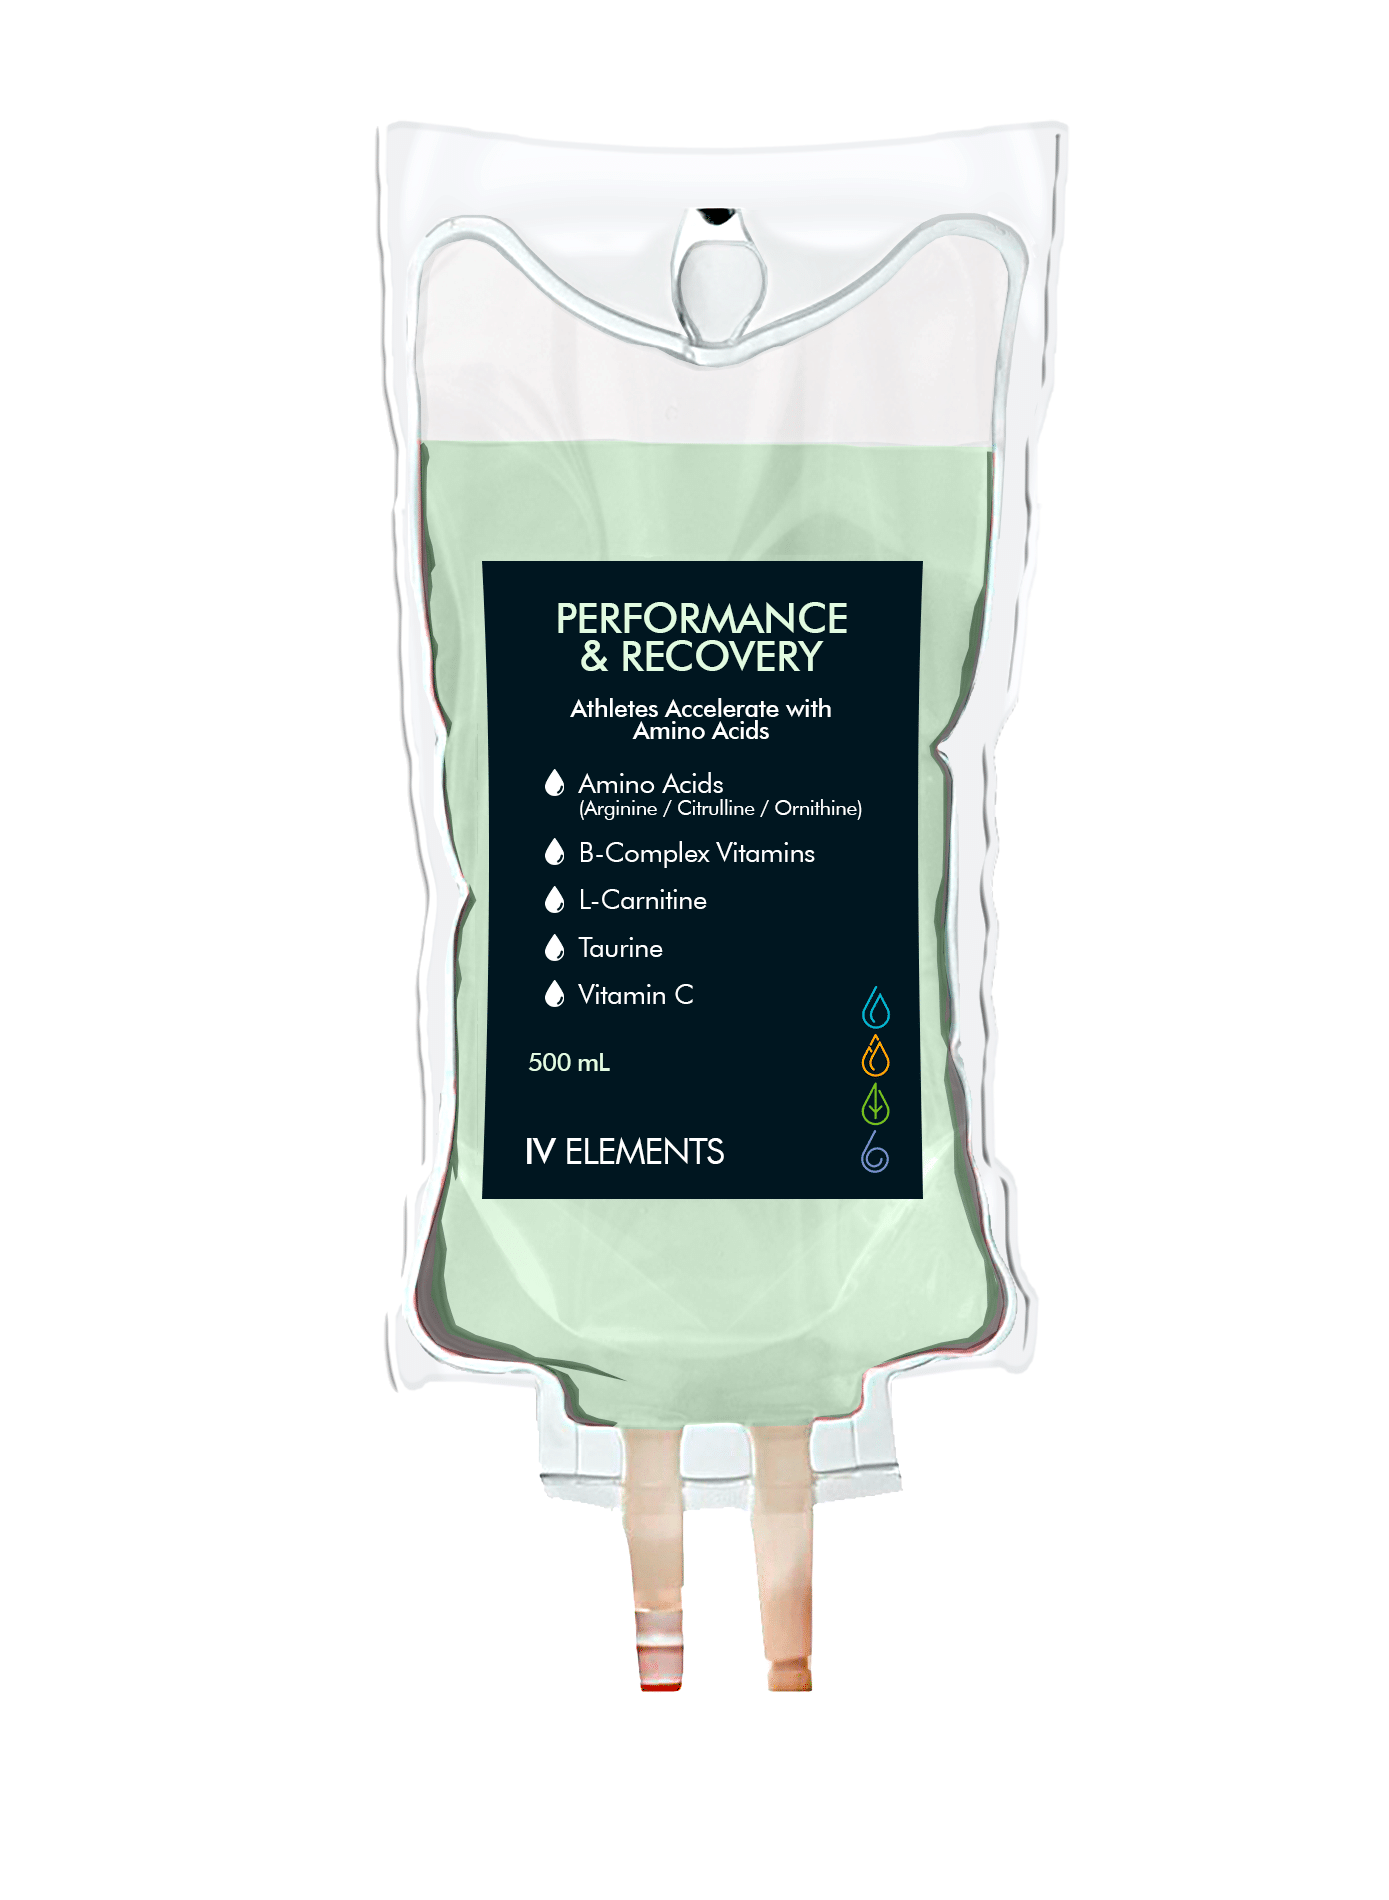 Performance Recovery IV drip bag from IV Elements: Athletes accelerate with amino acids